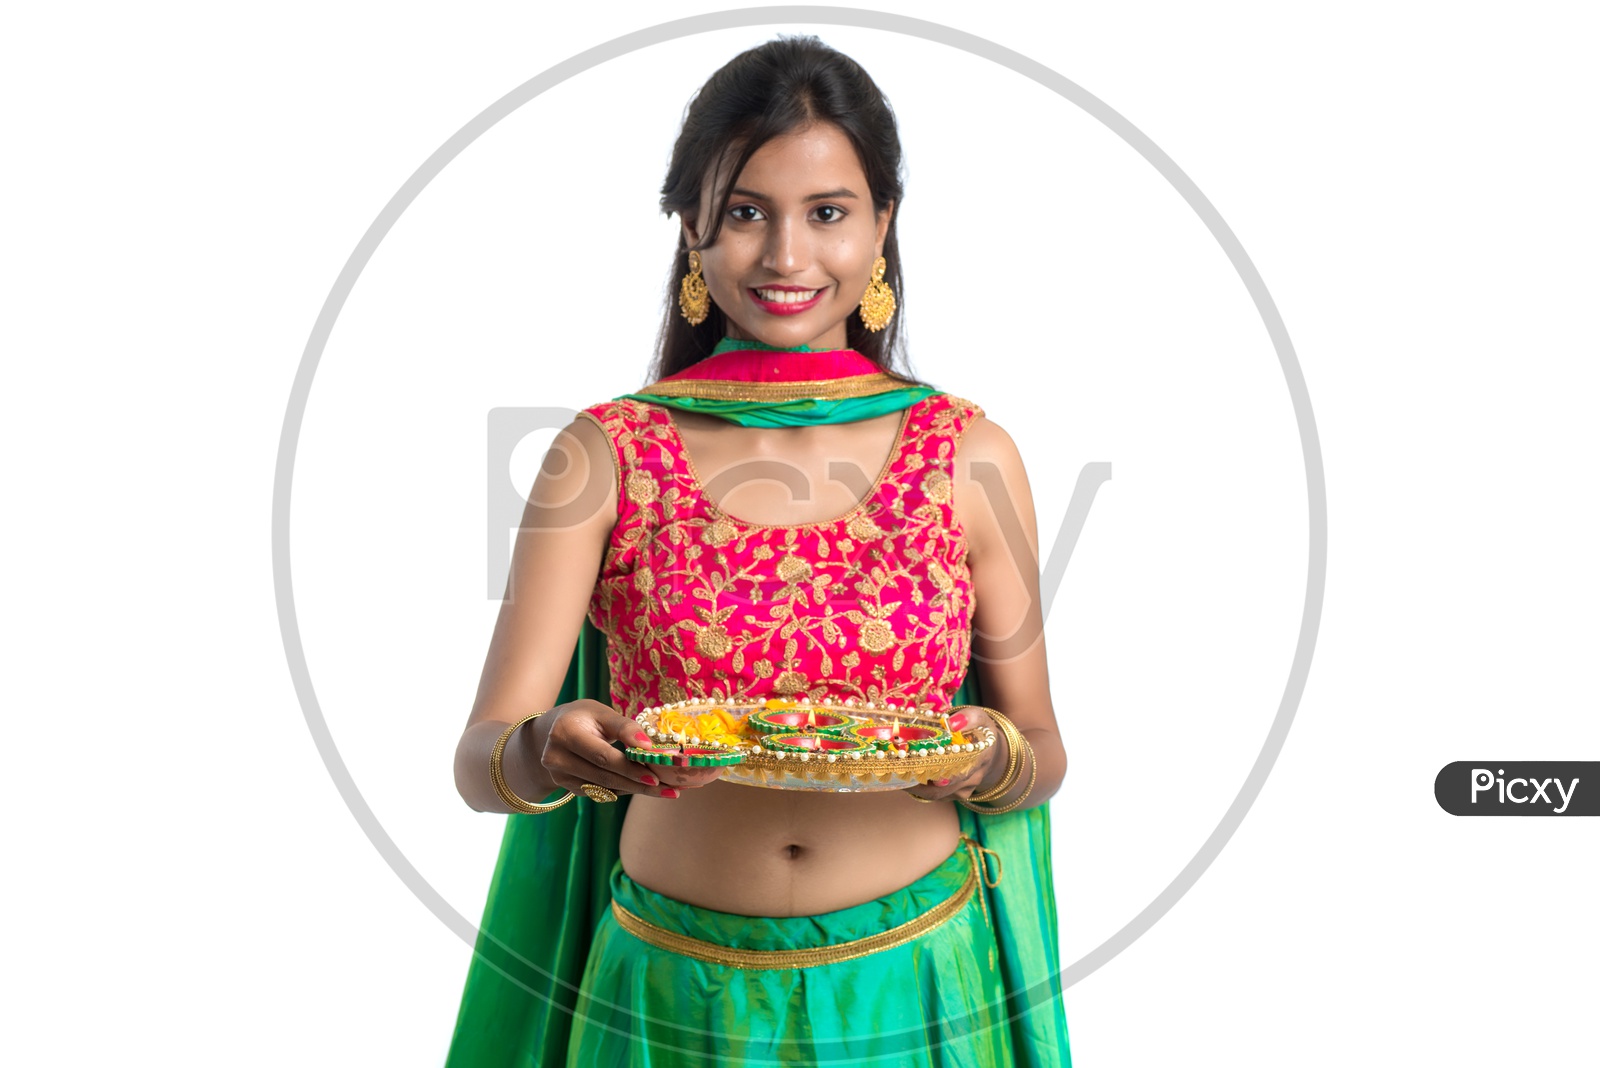 Portrait of a Young Indian Traditional Girl  Holding  Dia Plate And  Dia In Hand  Over an Isolated White Background